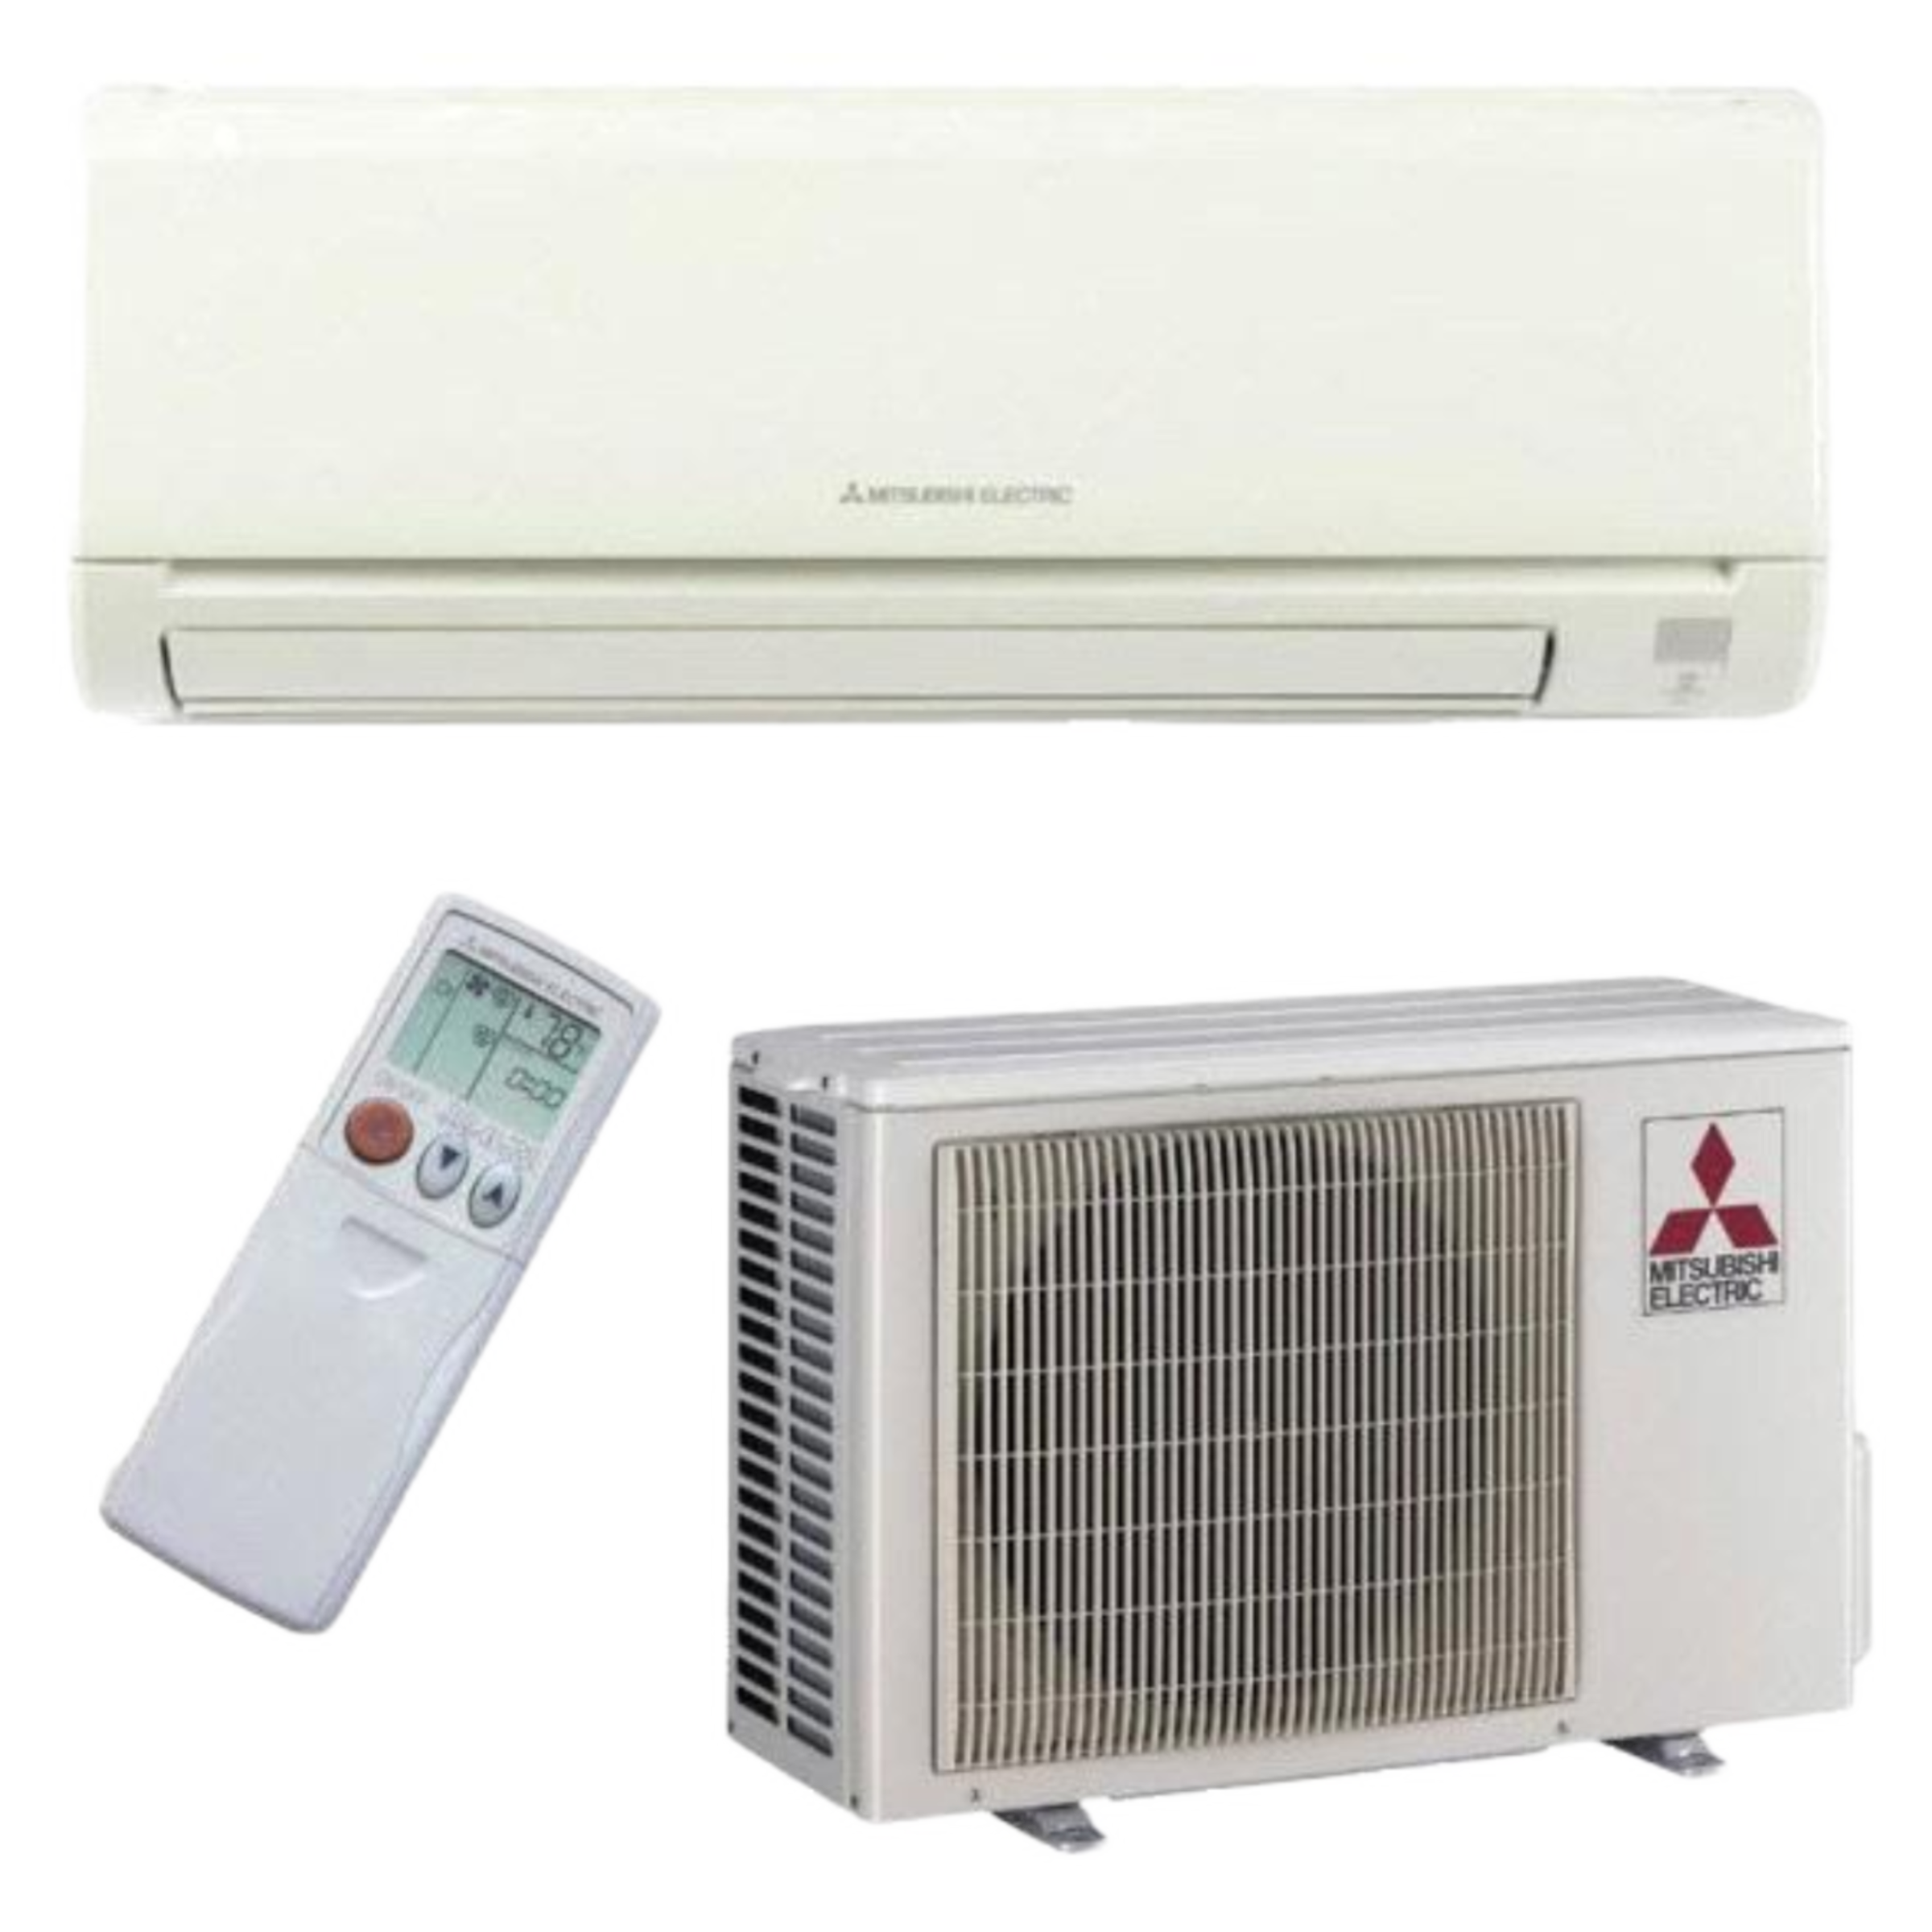 Mitsubishi M-Series 13 SEER Single-Zone Ductless Split System Wall Mounted Cooling Only Air Conditioner, 9000 BTU, 115V, R-410A